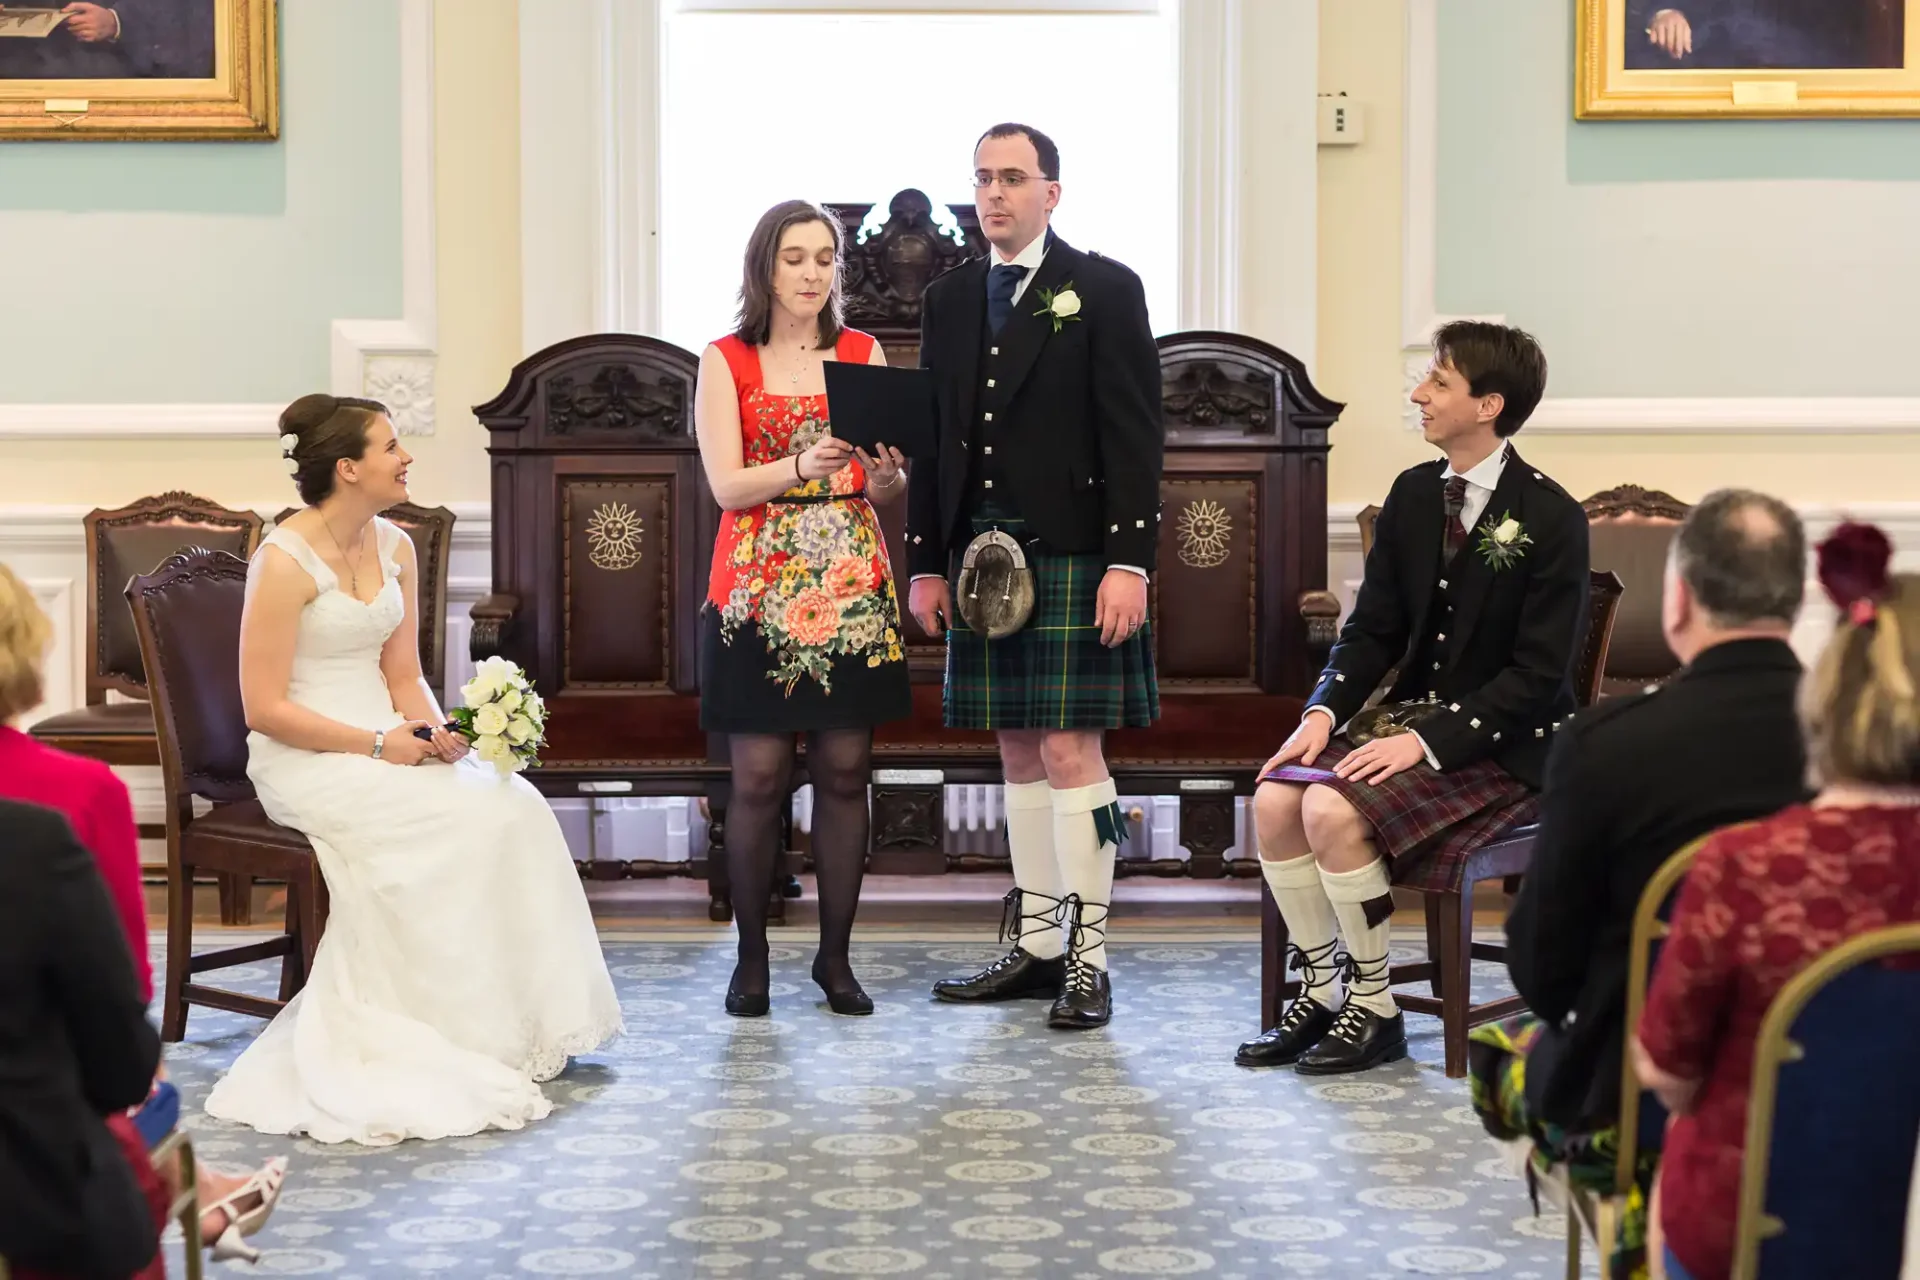 A wedding ceremony in a room with a woman in a floral dress and a man in a kilt standing at the front, while another woman sits and listens.